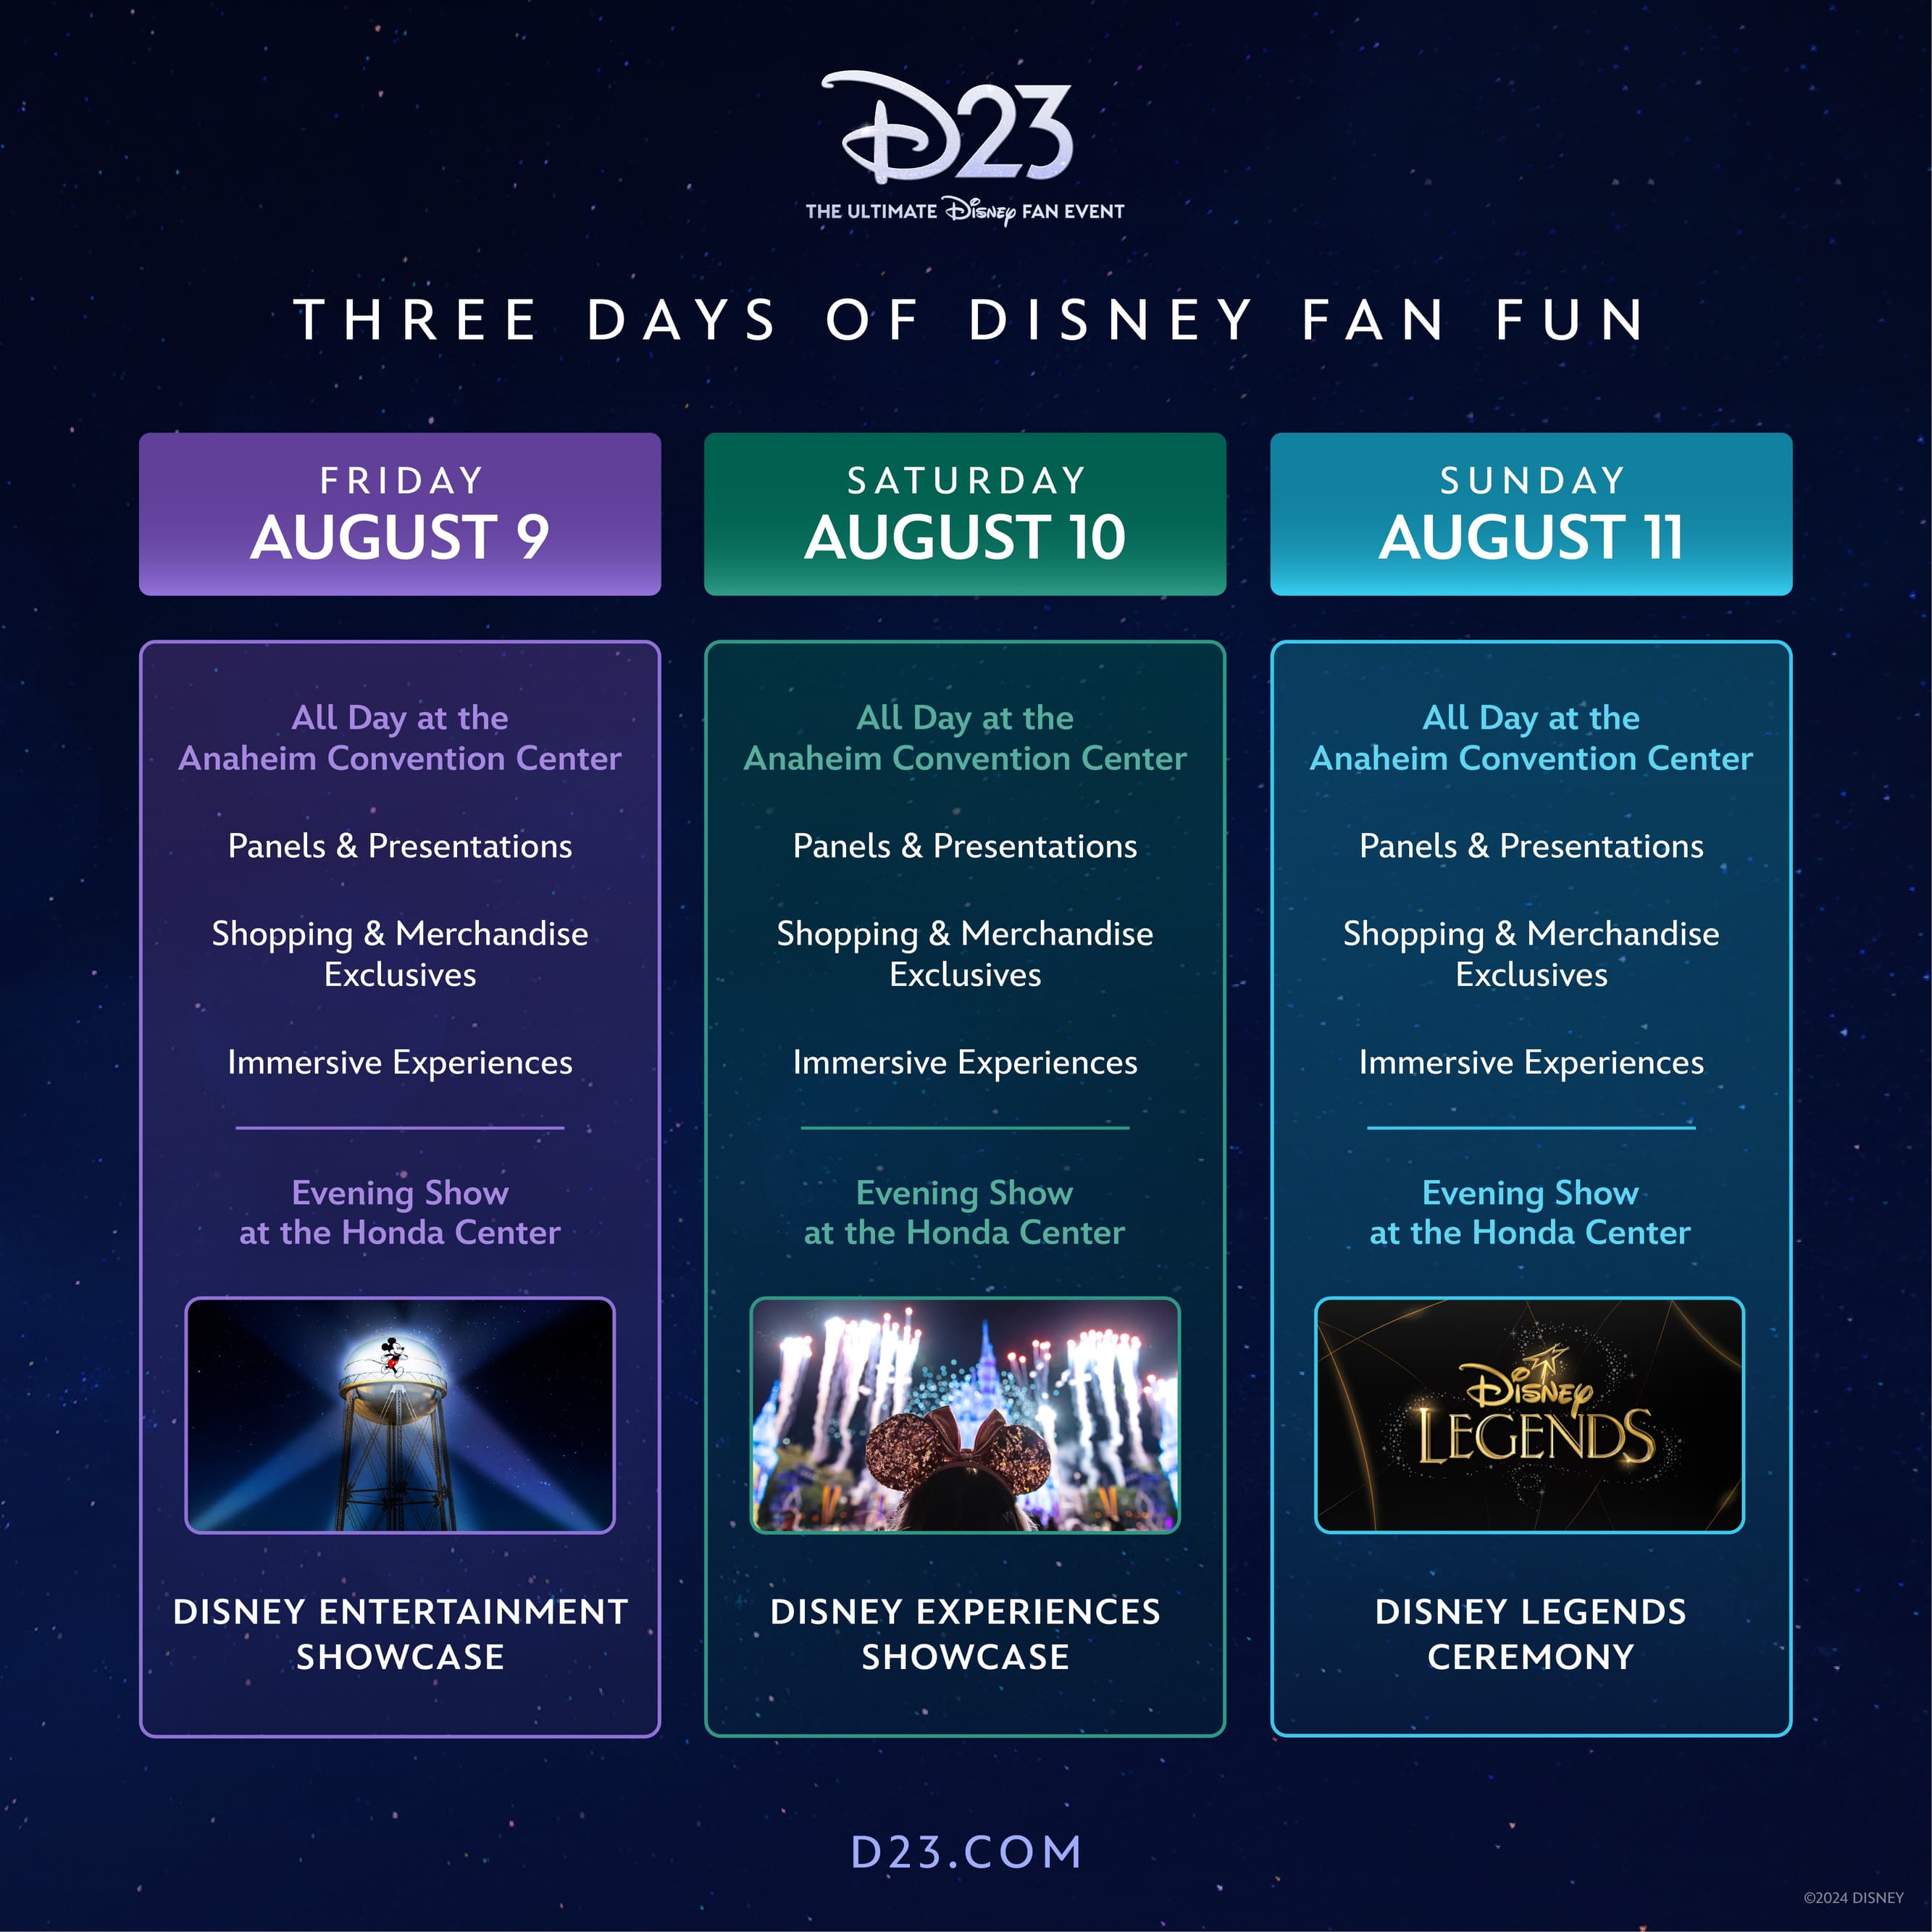 D23 Convention Schedule Overview